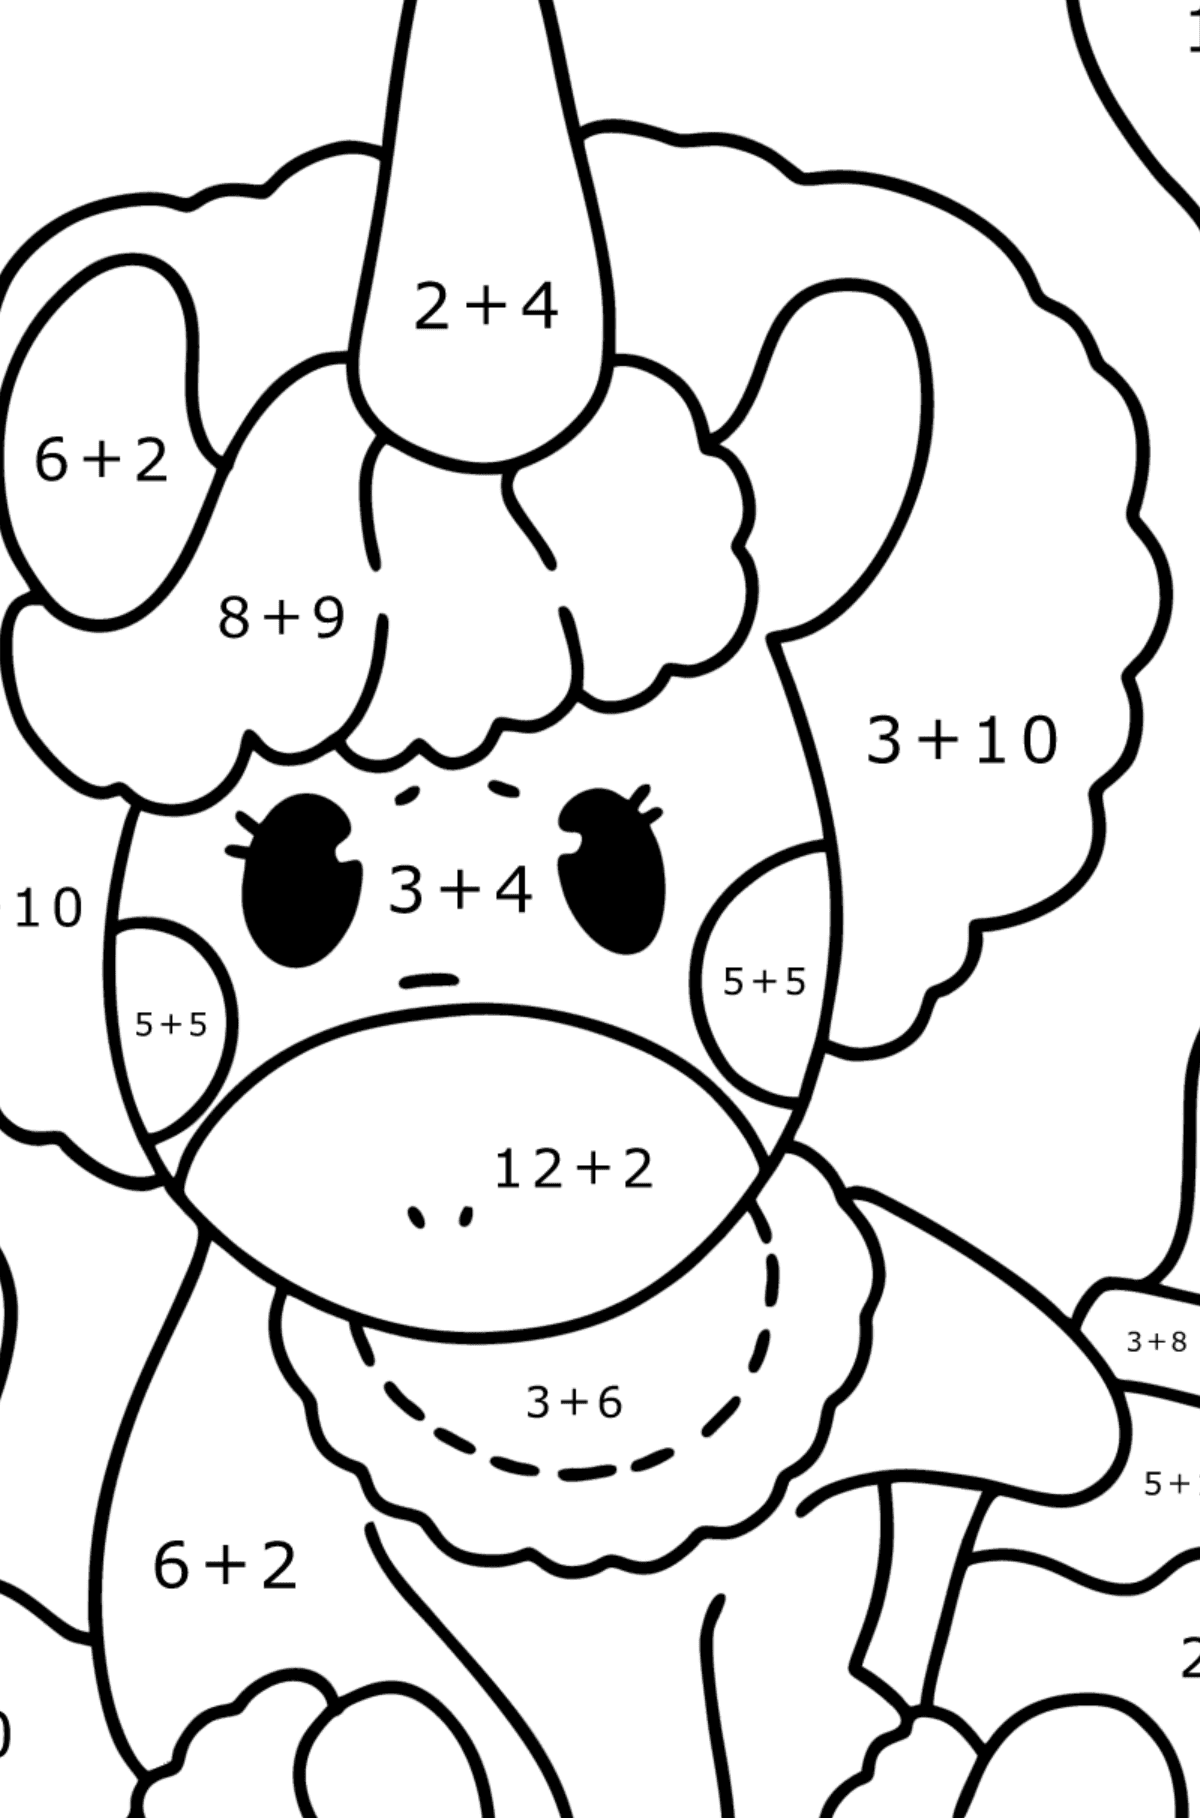 Unicorn kid coloring page - Math Coloring - Addition for Kids